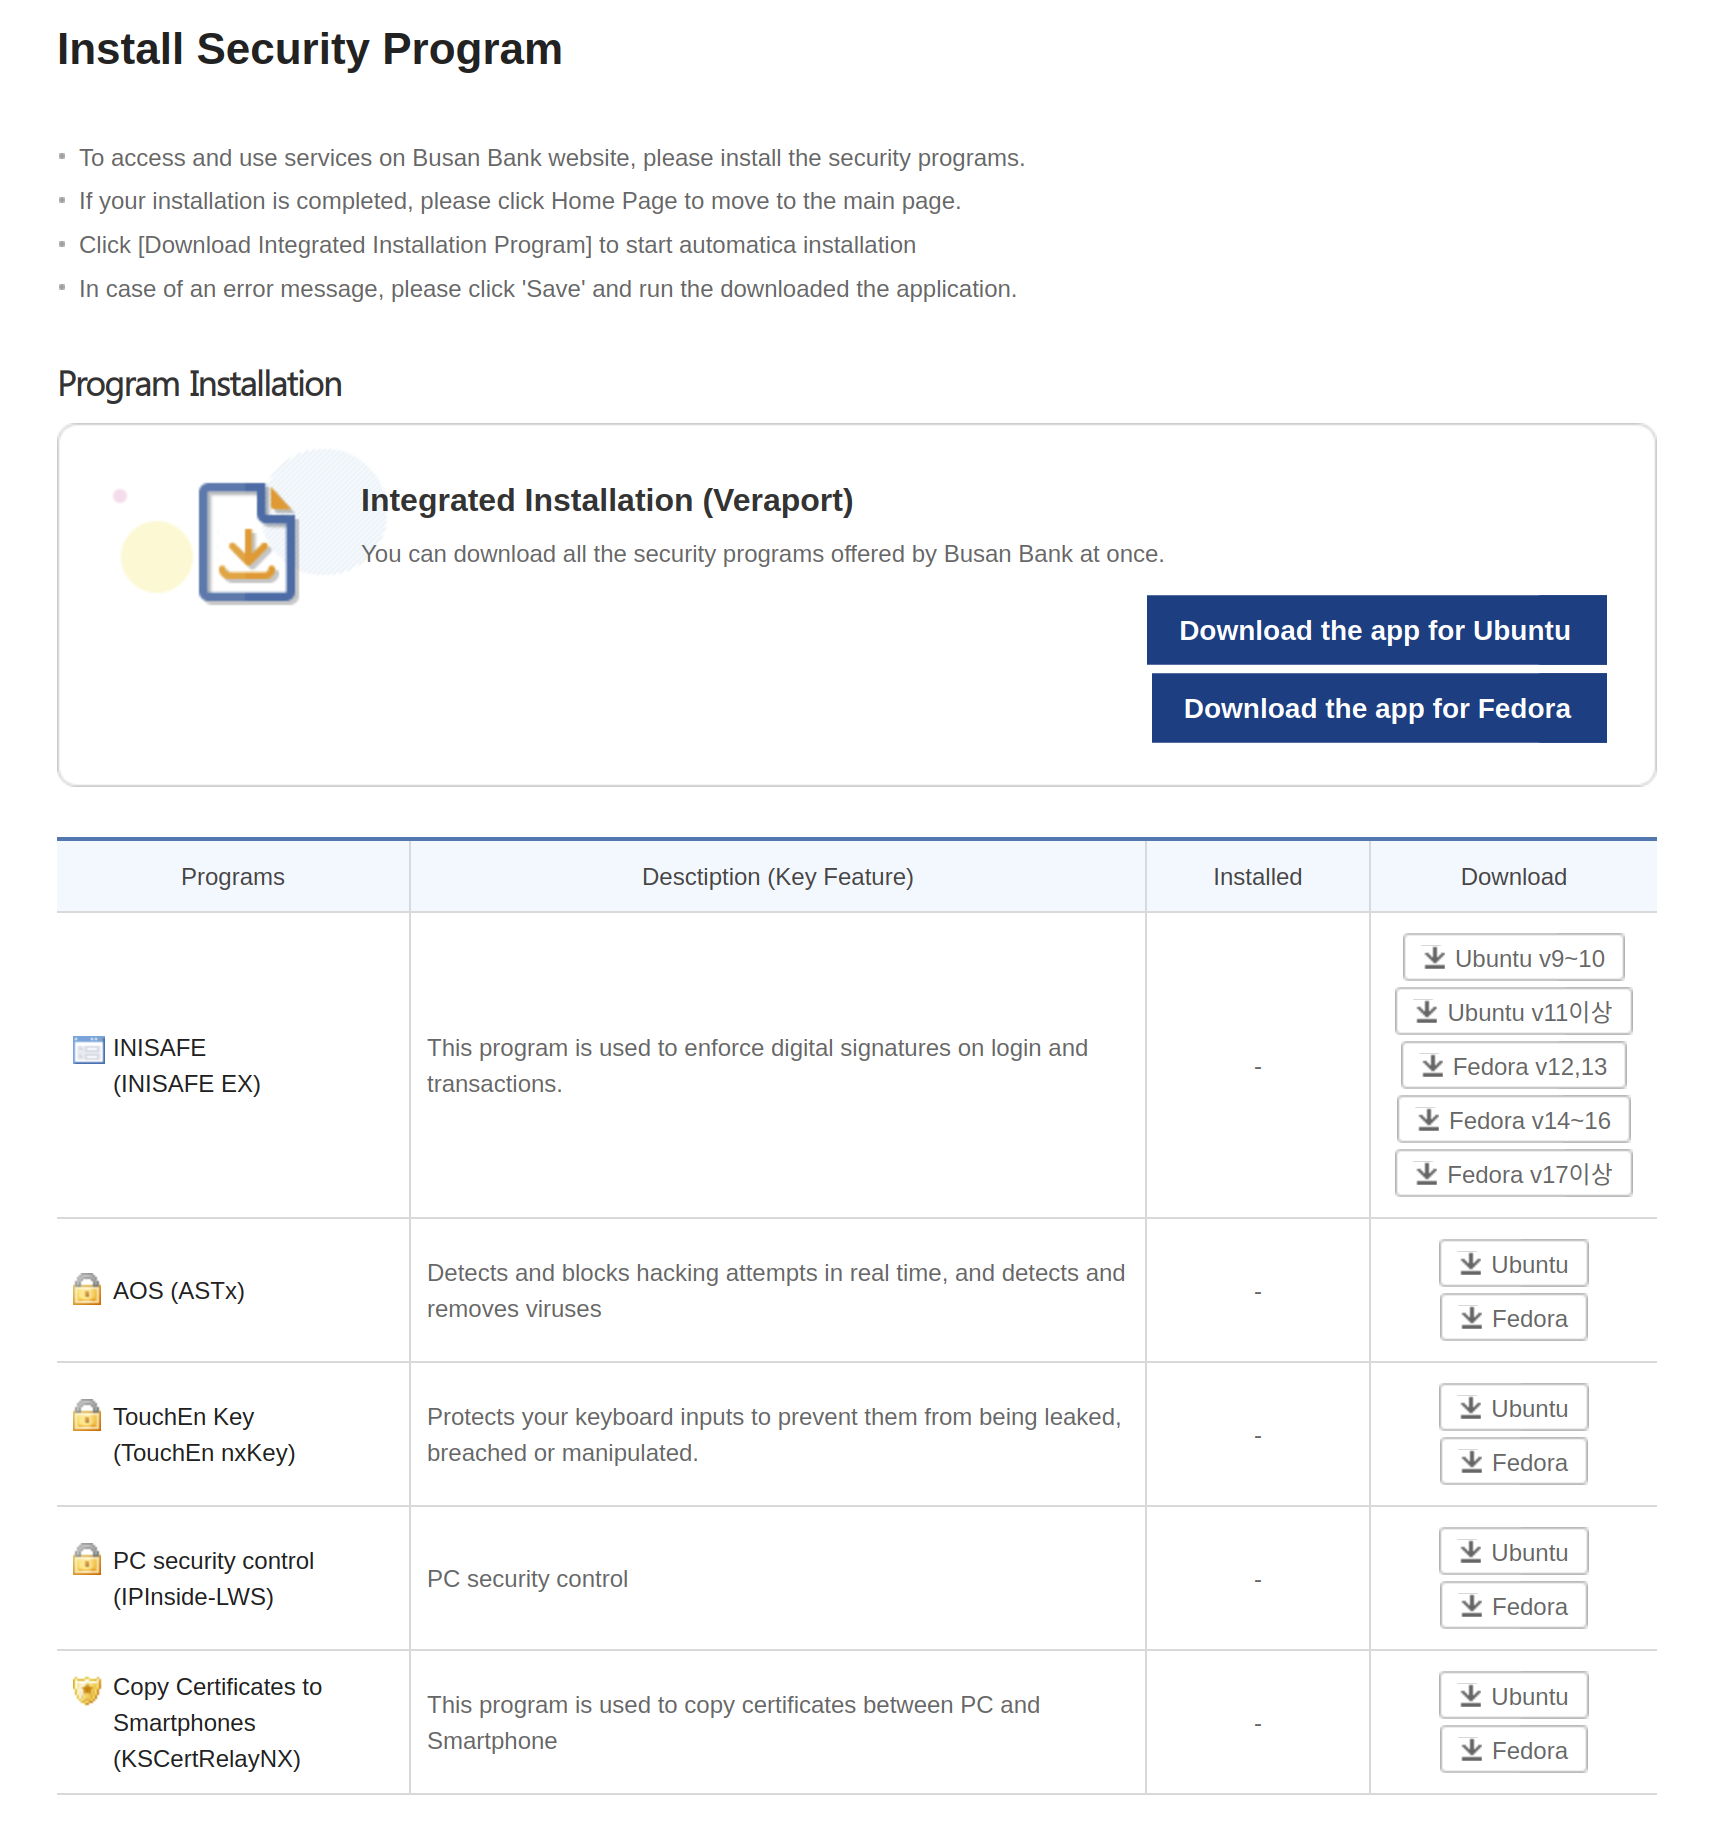 Screenshot of a page titled “Install Security Program.” Below it the text “To access and use services on Busan Bank website, please install the security programs. If your installation is completed, please click Home Page to move to the main page. Click [Download Integrated Installation Program] to start automatica installation. In case of an error message, please click 'Save' and run the downloaded the application.” Below that text the page suggests downloading “Integrated installation (Veraport)” and five individual applications.